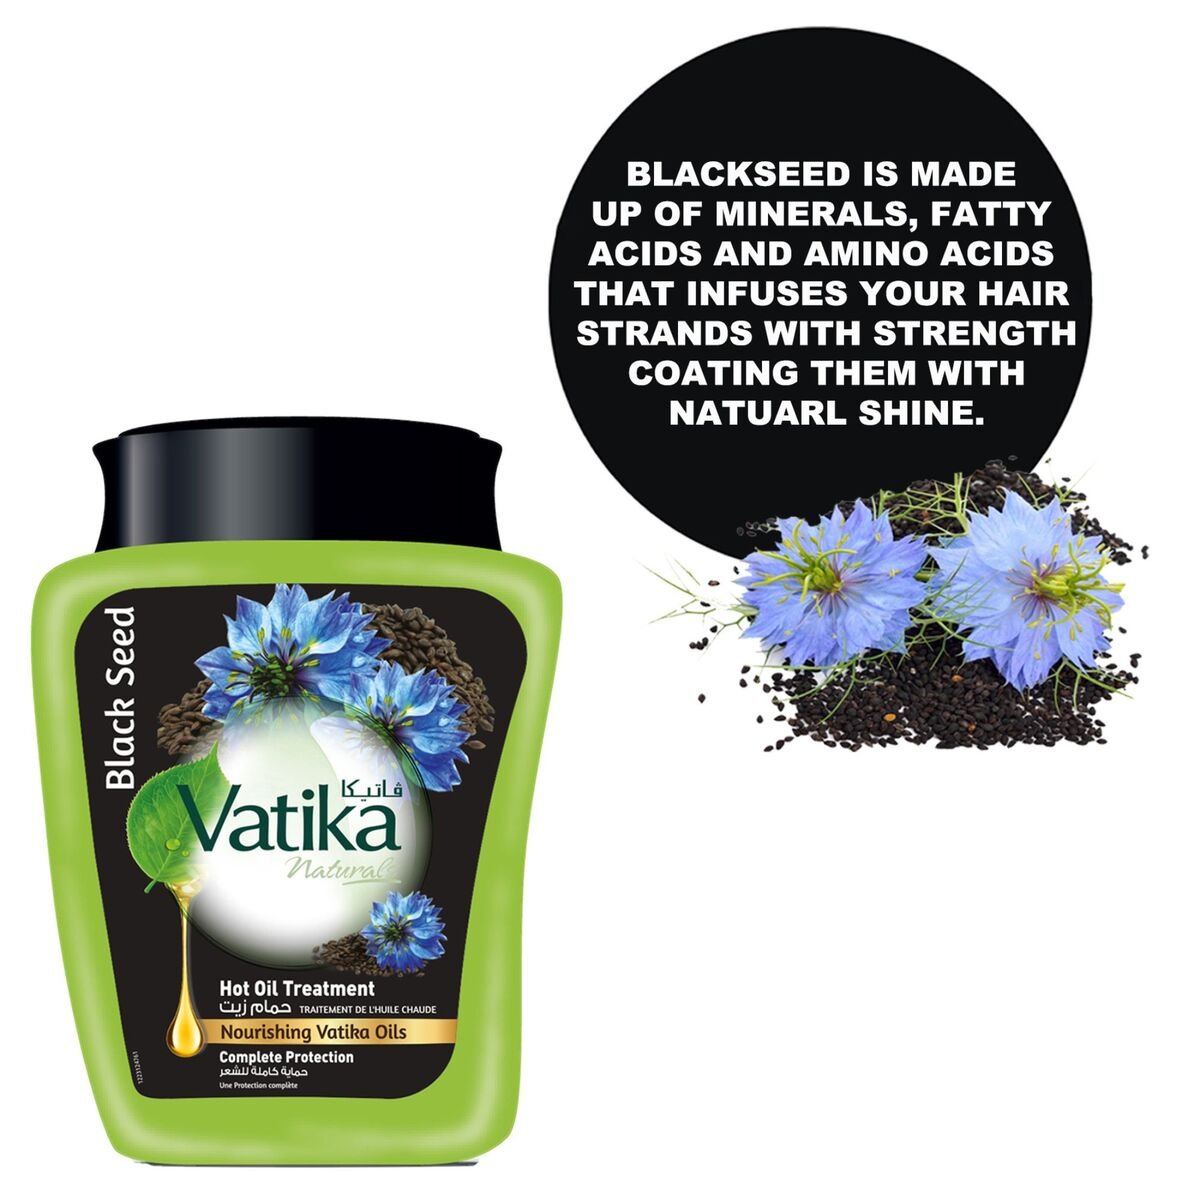 Vatika Naturals Hammam Zaith Hot Oil Treatment Enriched With Blackseed Complete Protection 500 g